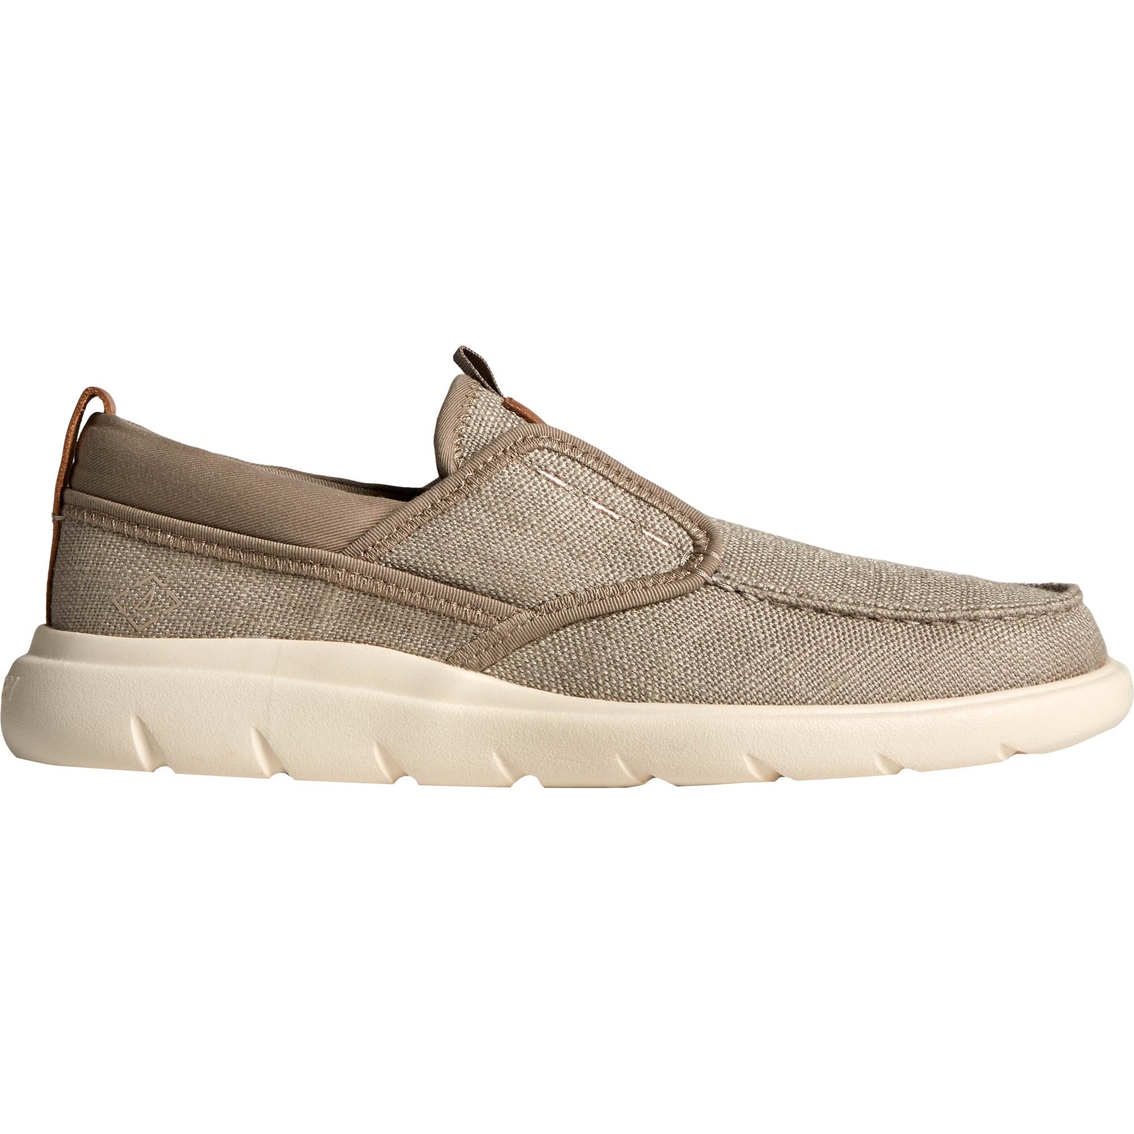 Sperry Seacycled Captain's Moc Baja Sneakers | Casuals | Shoes | Shop ...